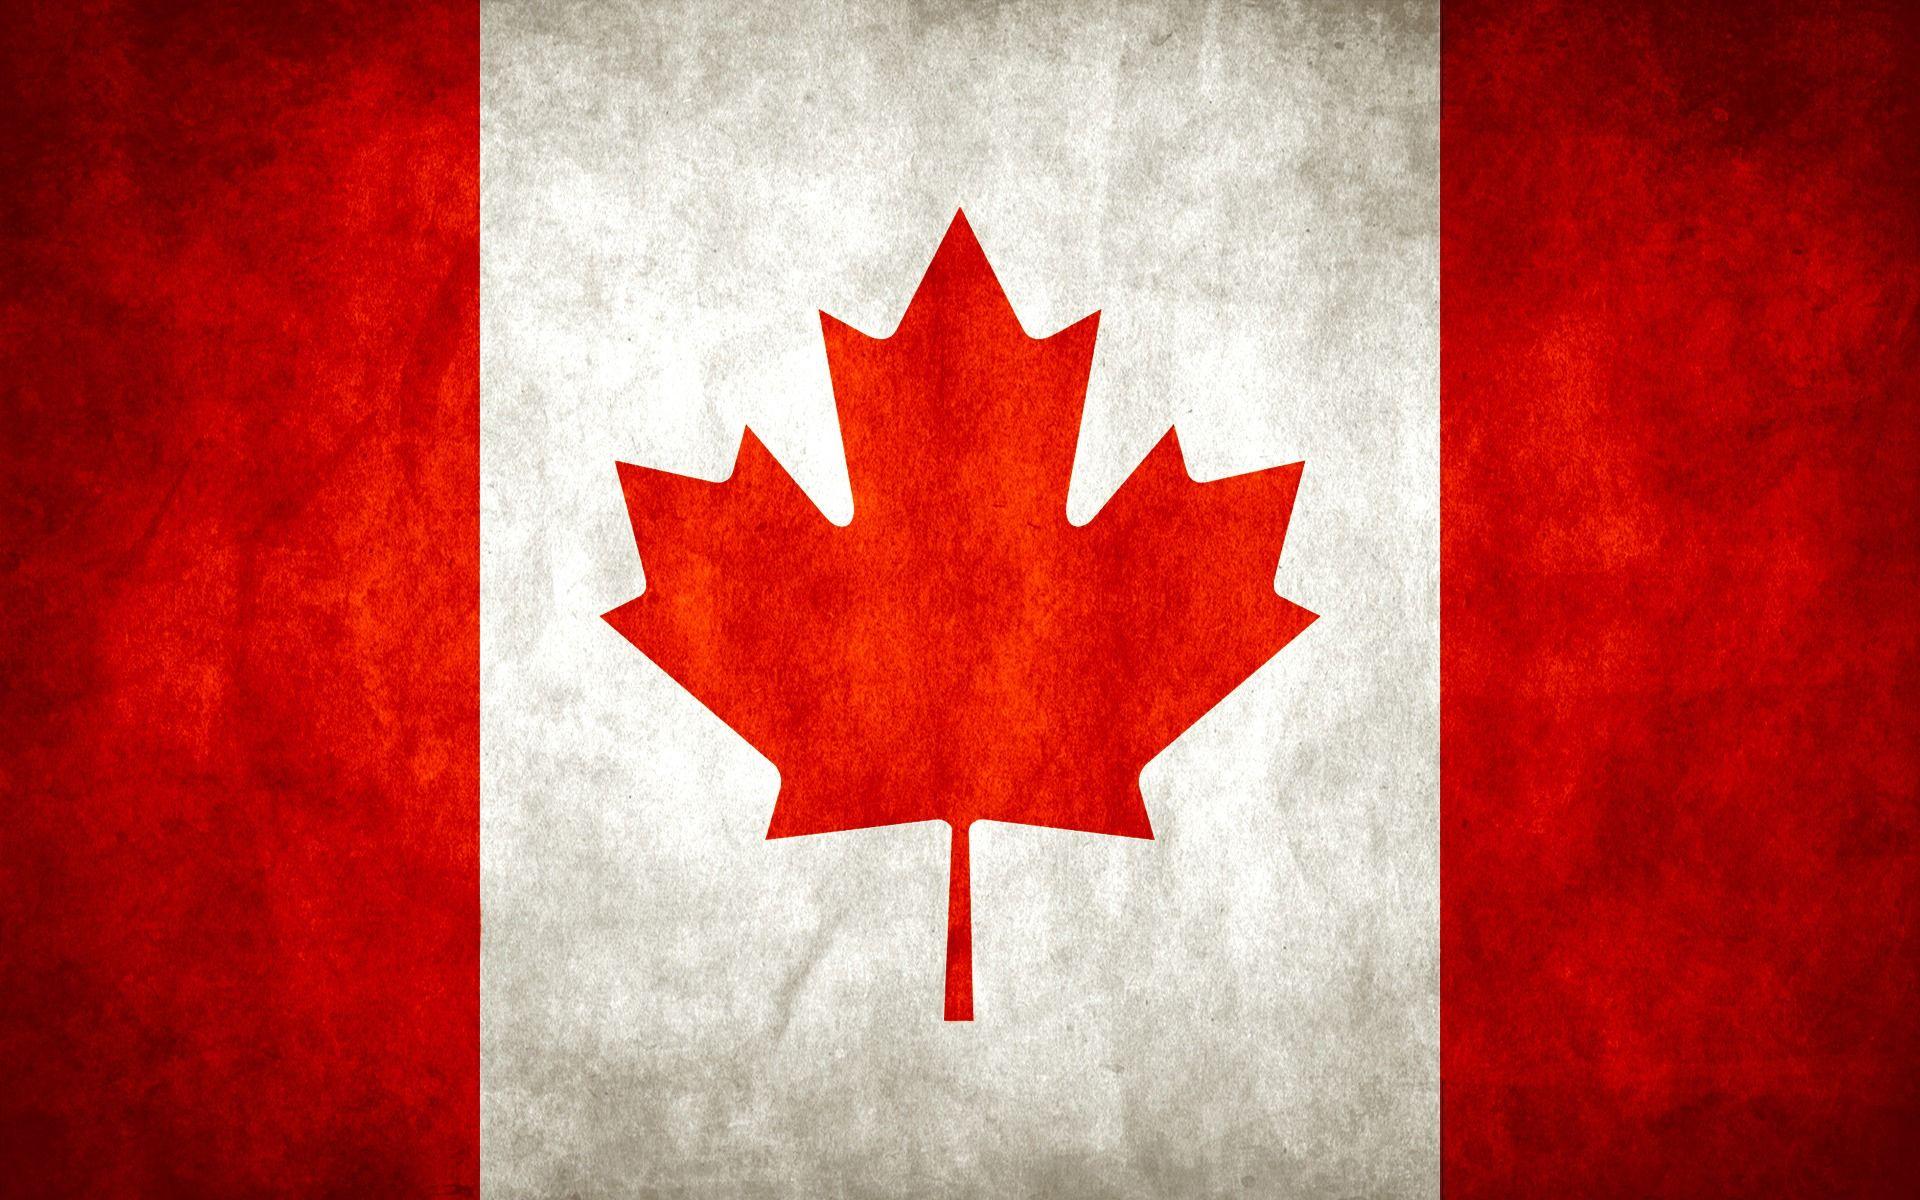 Canada Flag Wallpaper Canada World Wallpaper in jpg format for free download